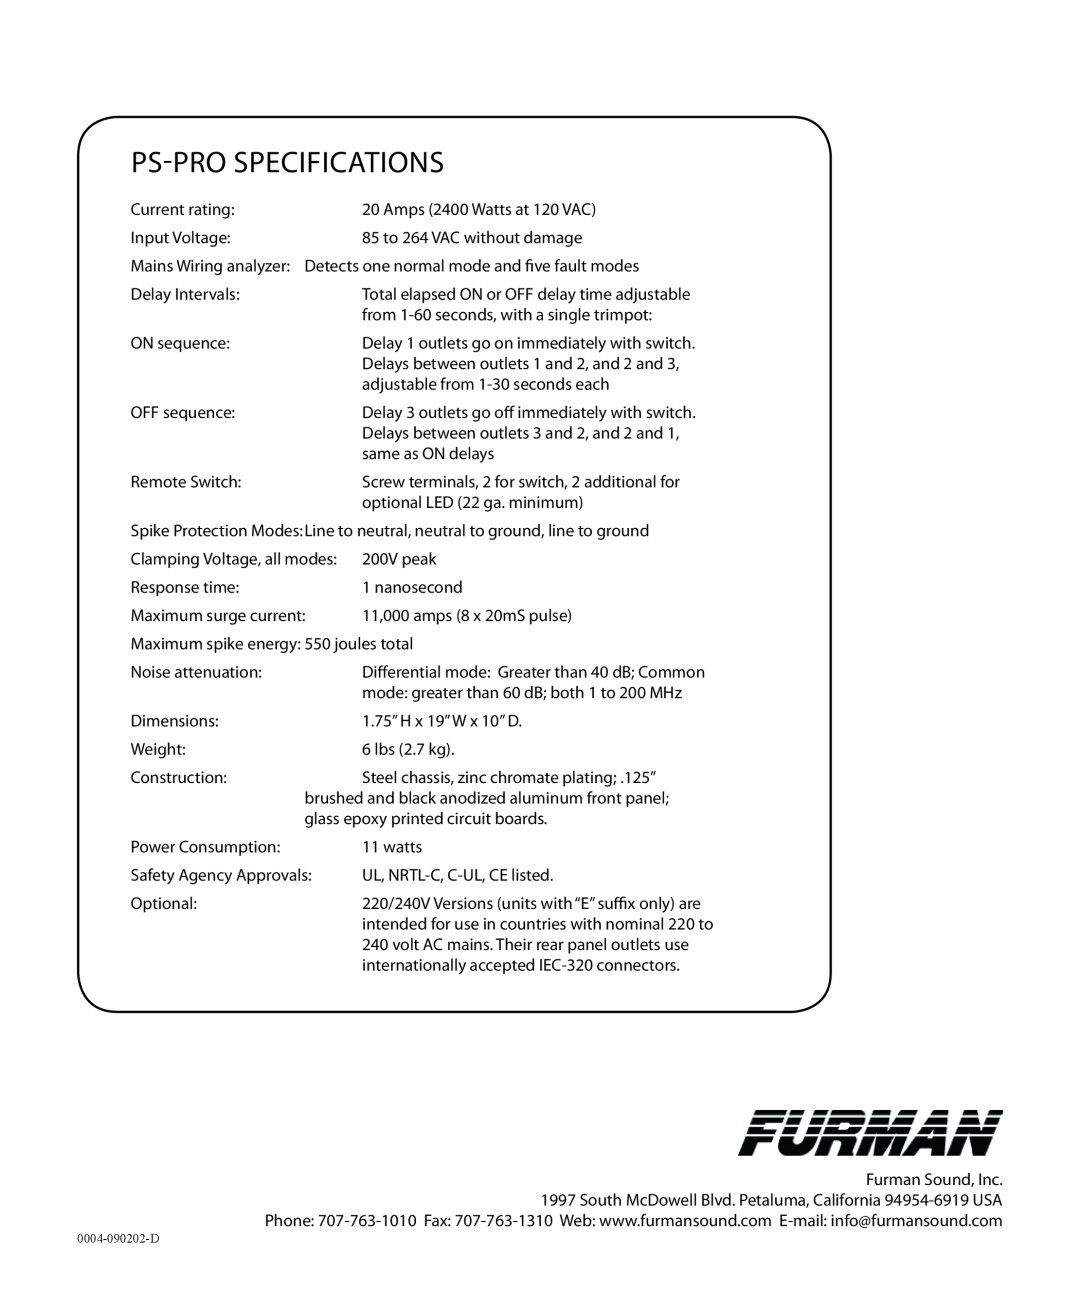 Furman Sound PS-PRO manual Ps-Pro Specifications 